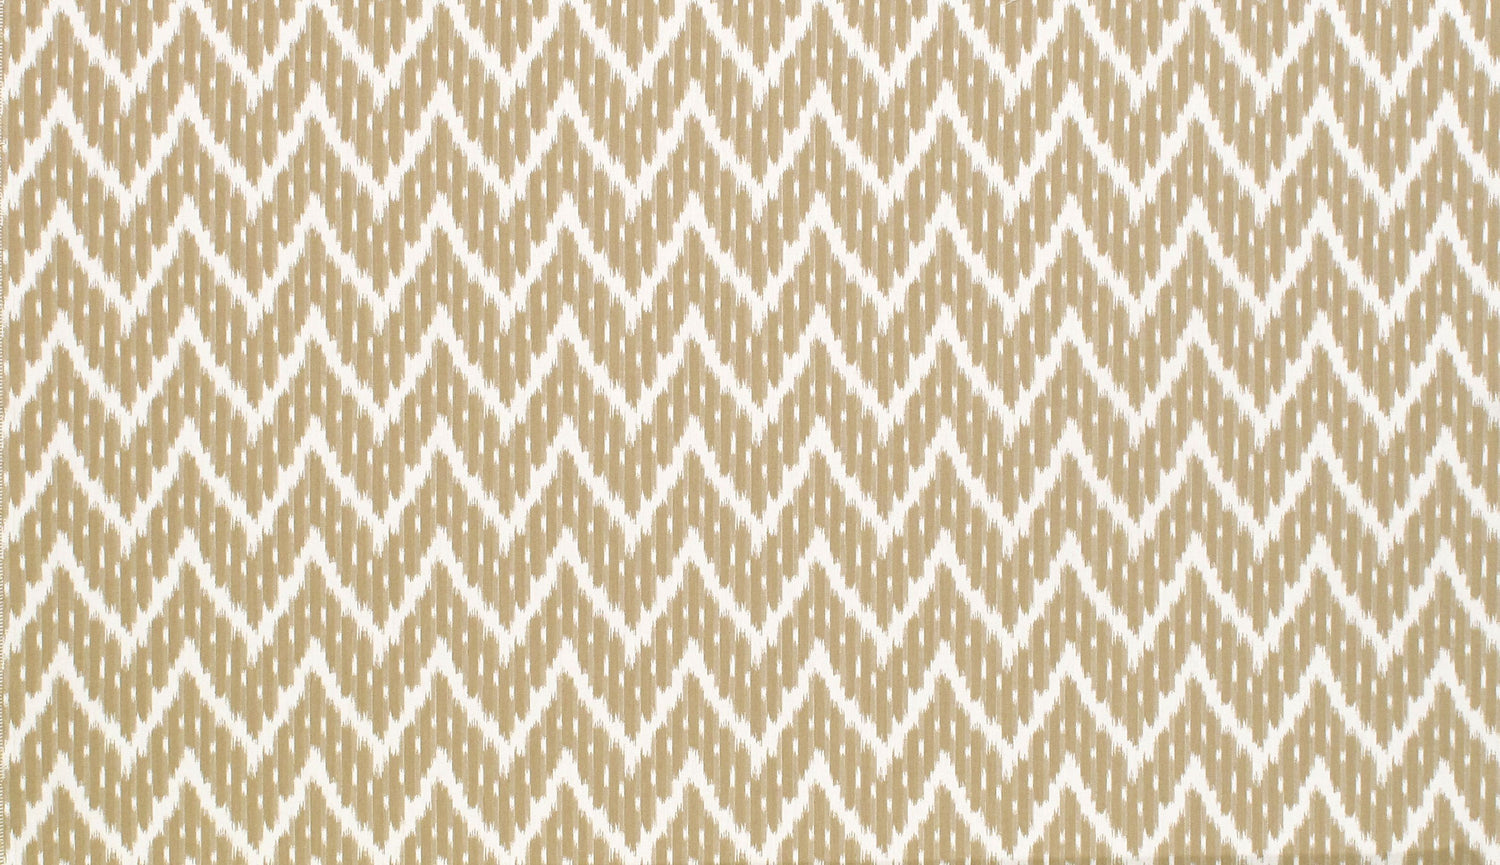 White Water fabric in driftwood color - pattern number PS 00035127 - by Scalamandre in the Old World Weavers collection